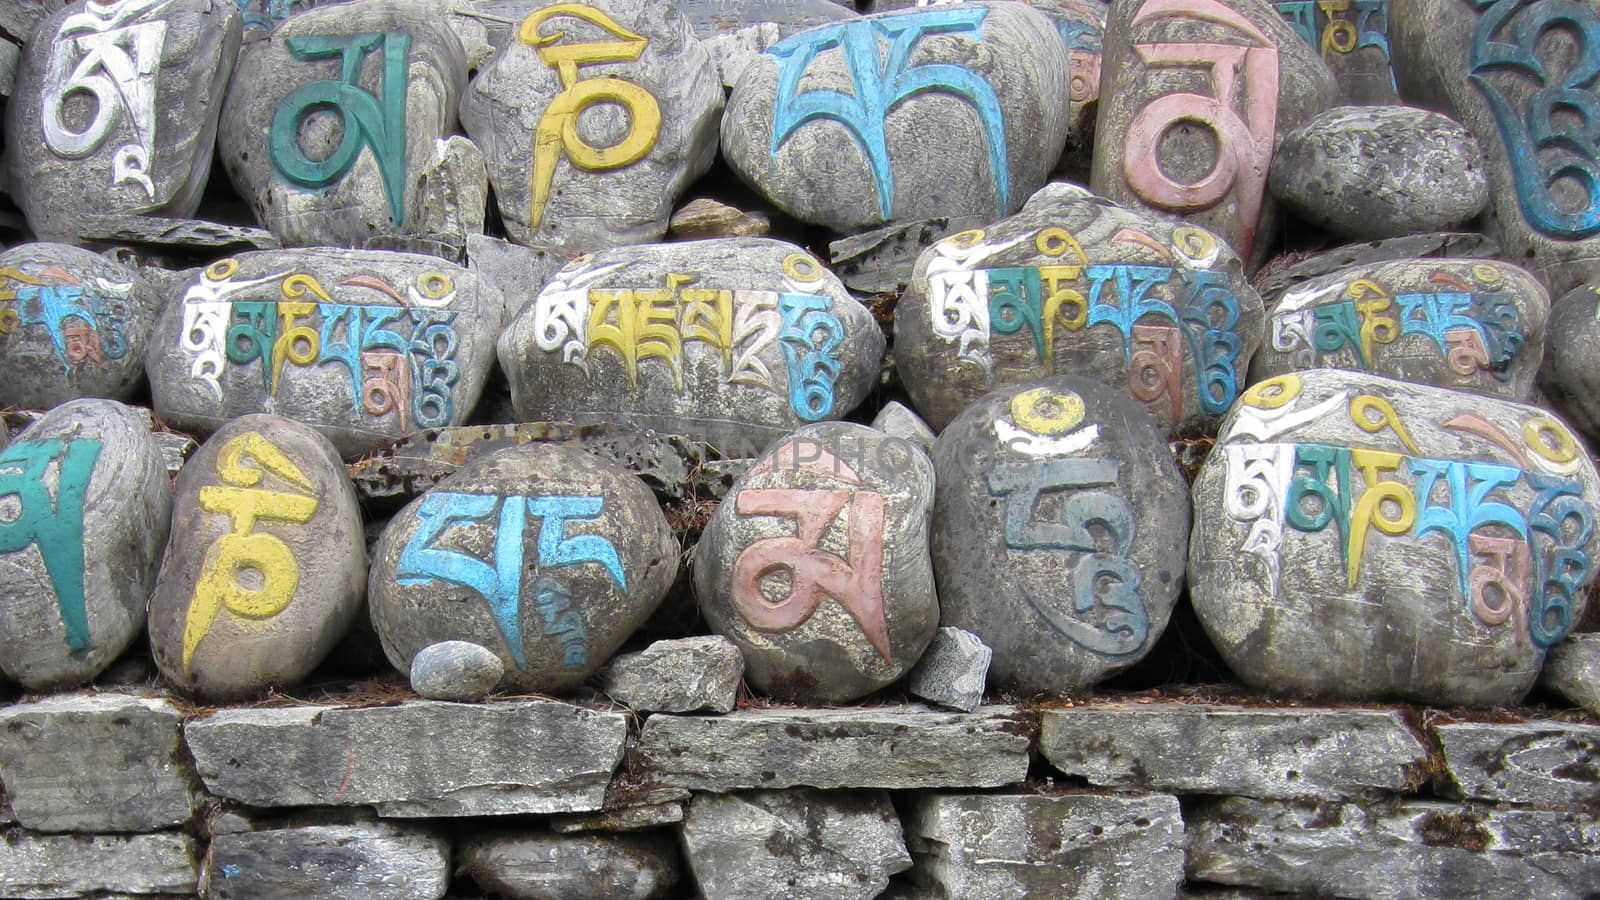 ANNAPURNA, NEPAL - APRIL 12, 2015: Buddhist mani wall made out of stones with colorful signs on April 12, 2015 in Annapurna, Nepal.